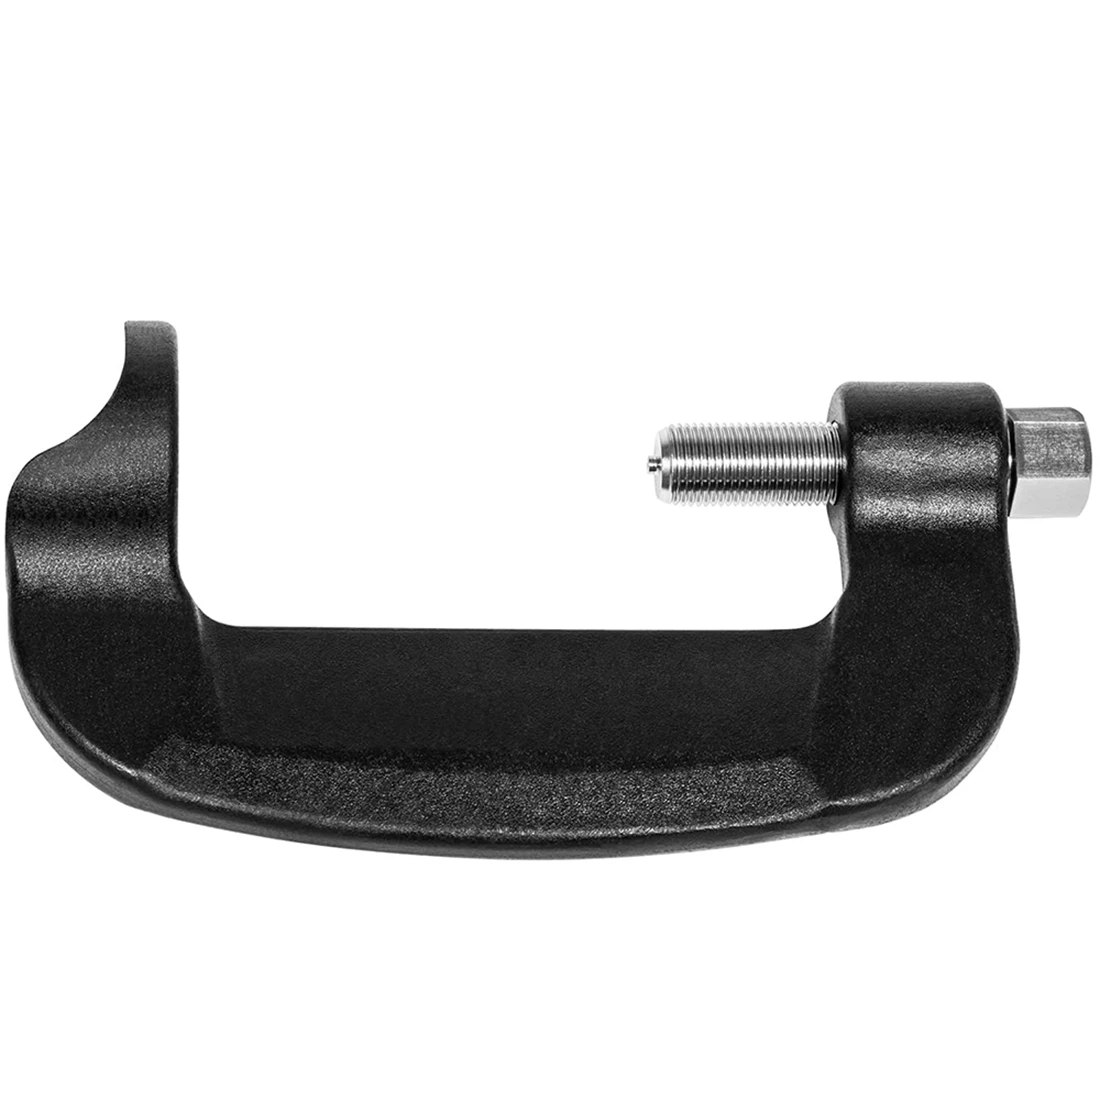 

Inboard Prop Puller for Ski / Wakeboard / Surf Propellers Works on 3/4 inch to 1-1/8 inch Shaft Replaces